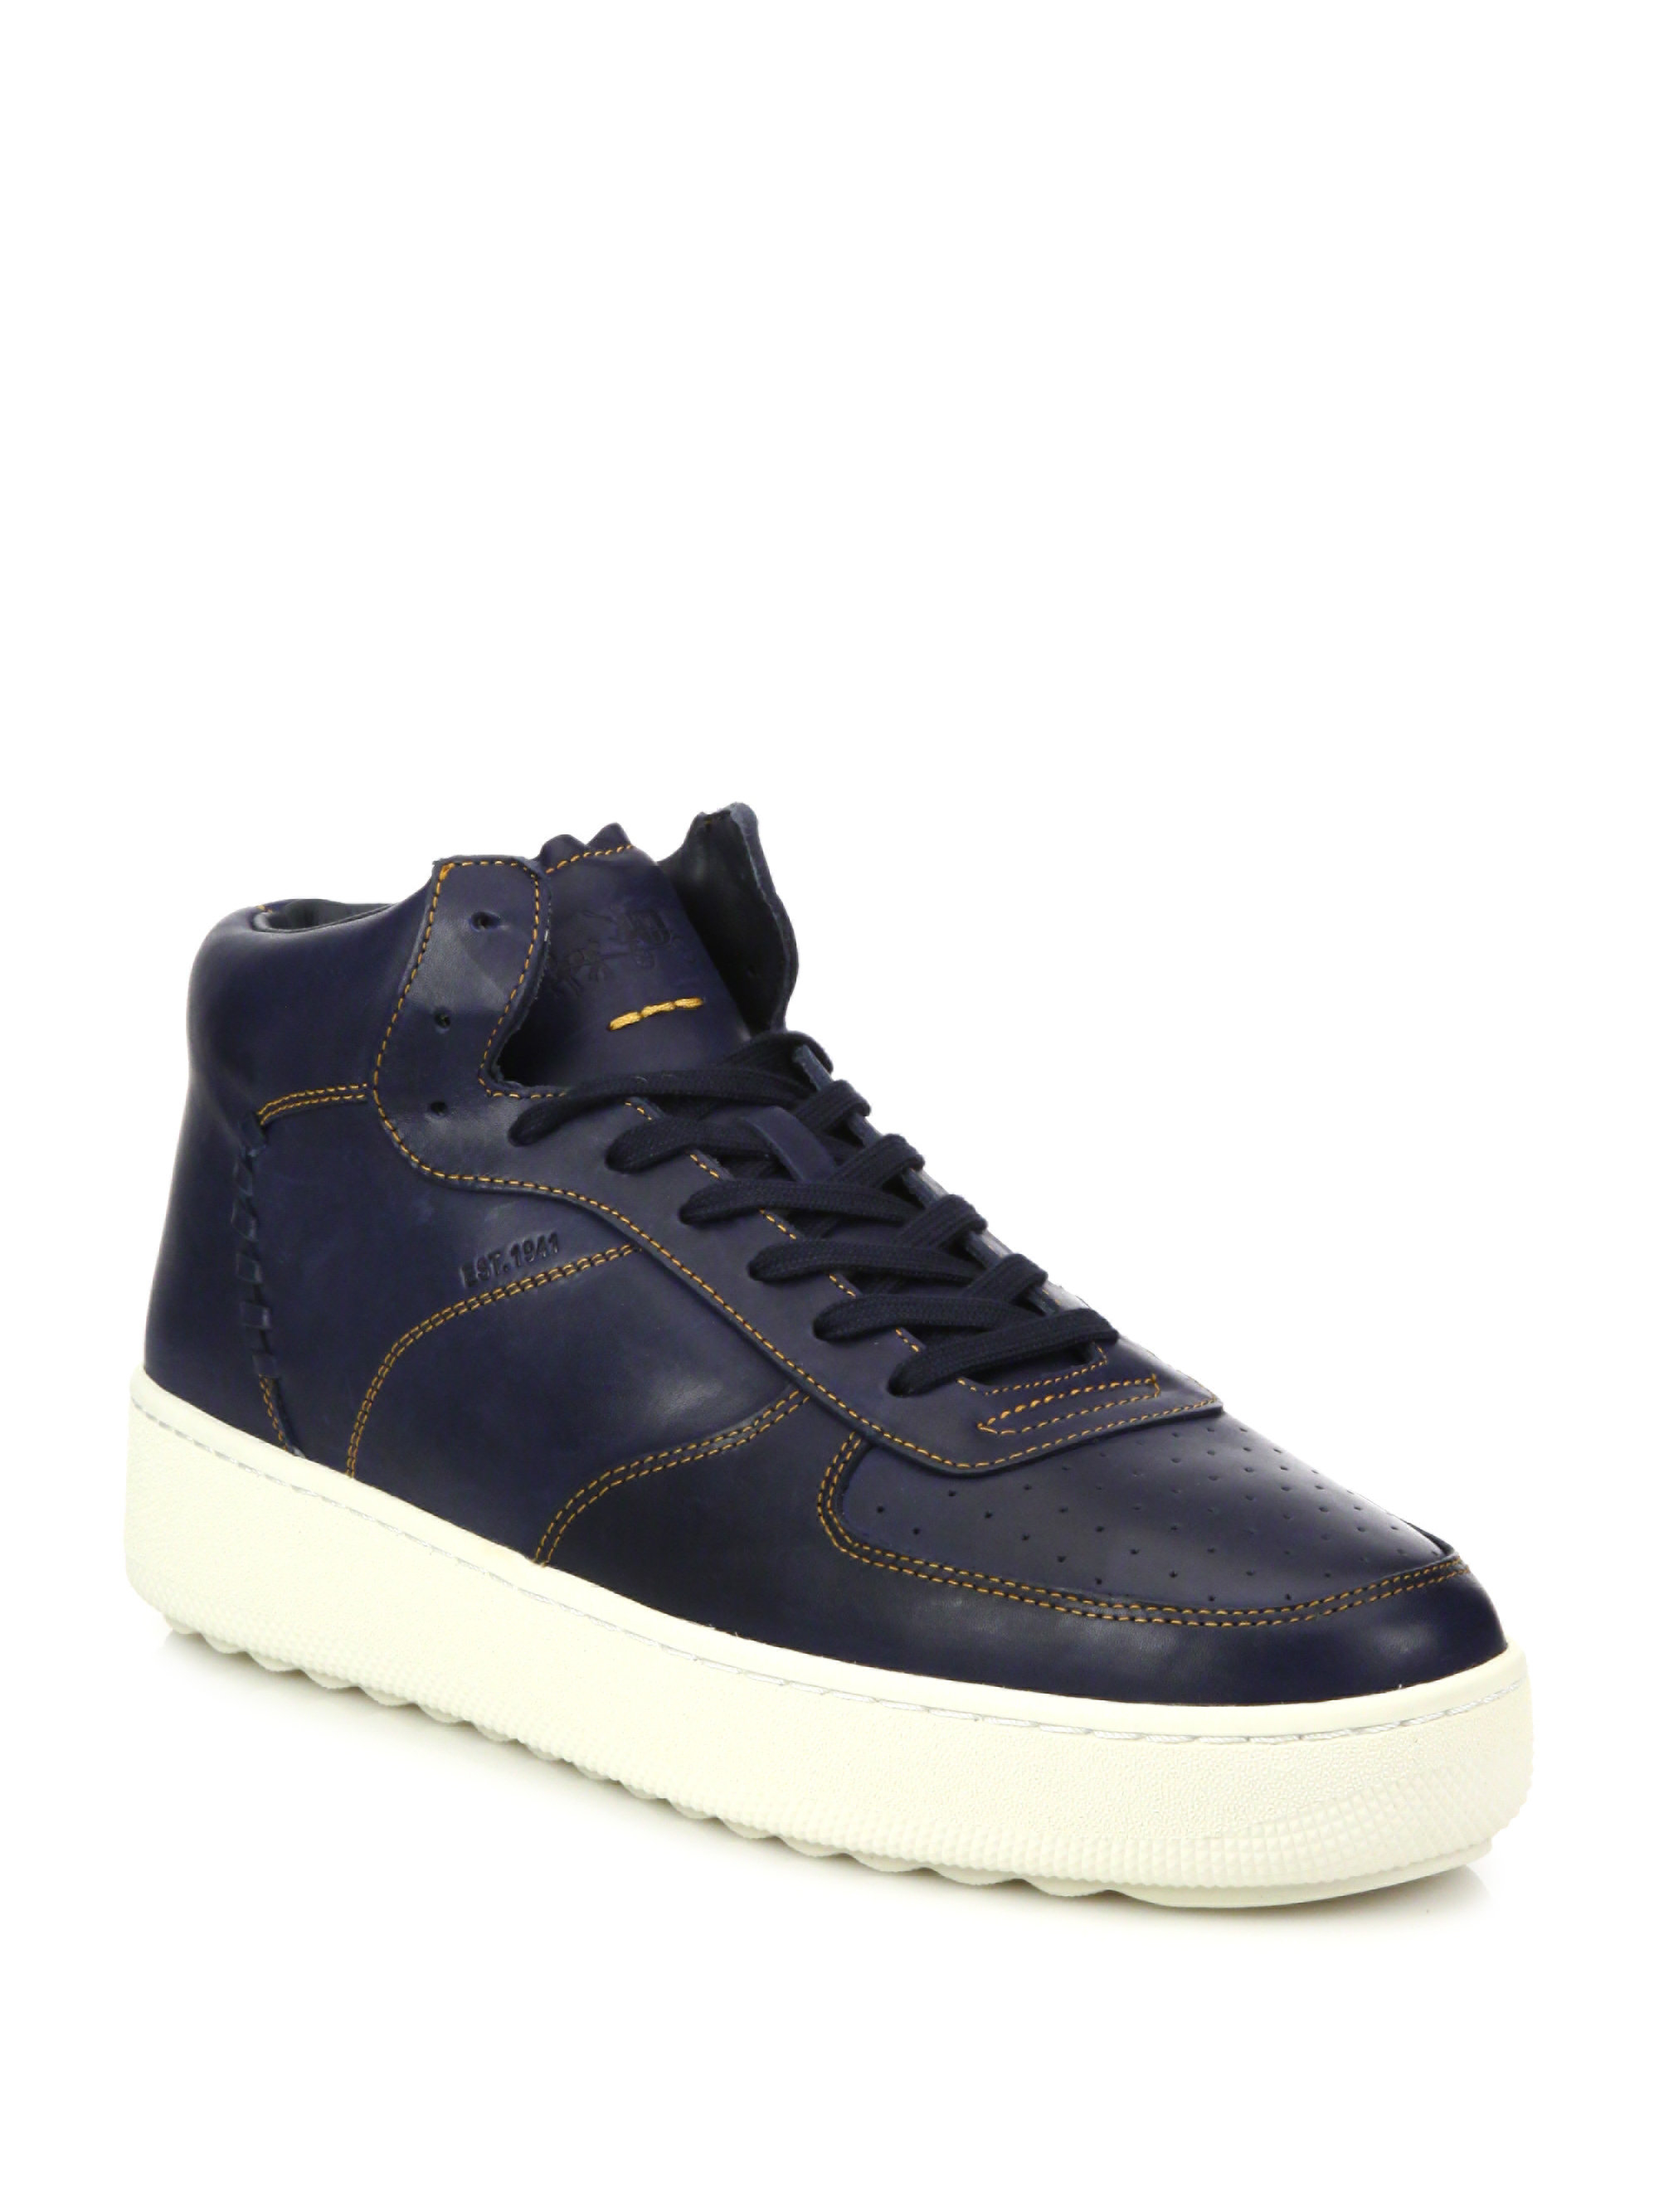 Lyst - Coach 1941 Patchwork Leather High-top Sneakers in Blue for Men